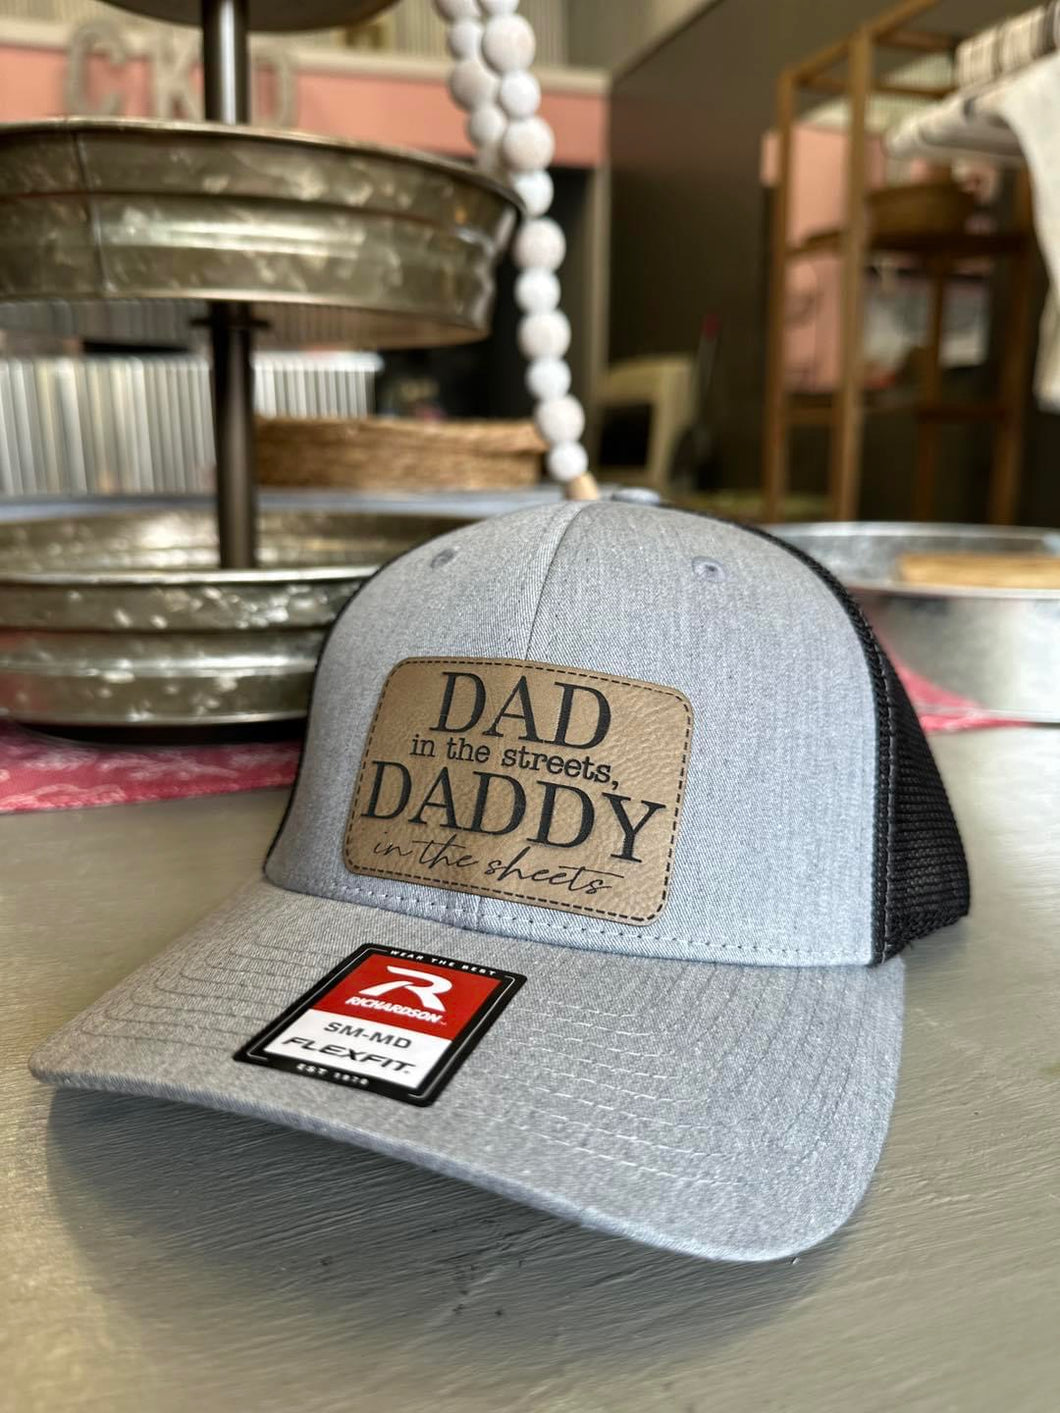 DAD in the streets, DADDY in the sheets hat